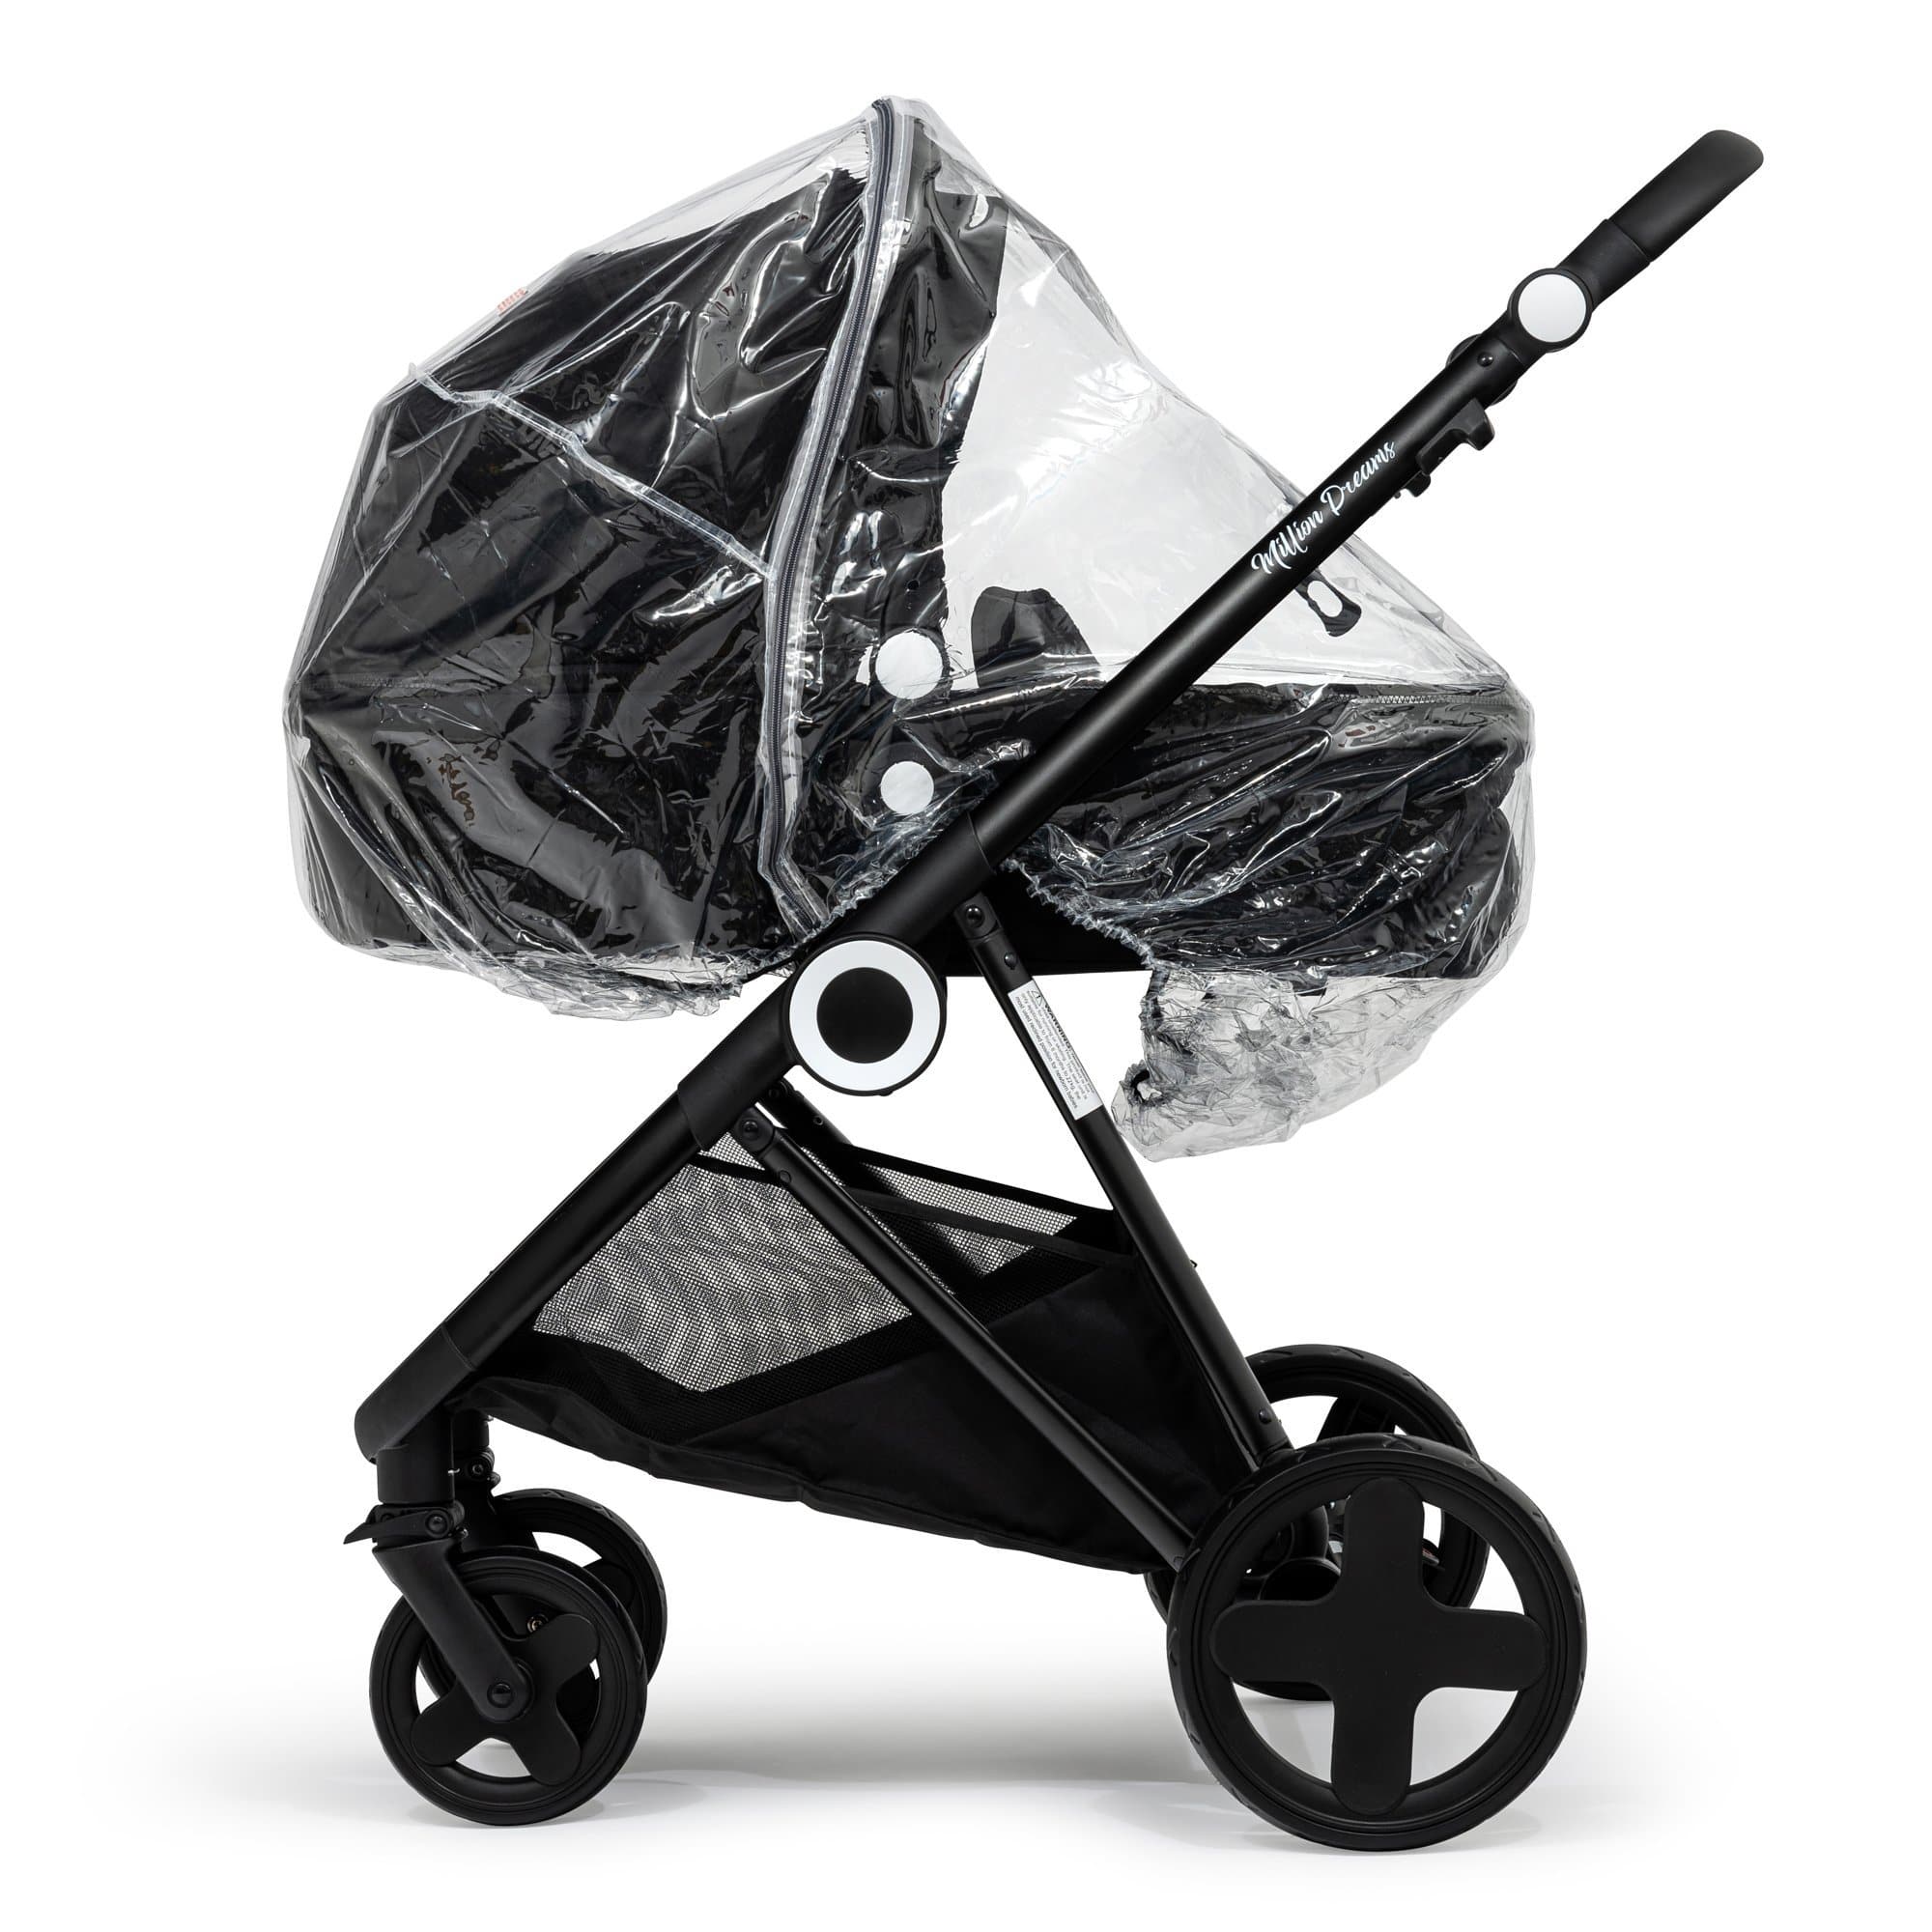 2 in 1 Rain Cover Compatible with Baby Elegance - Fits All Models - For Your Little One